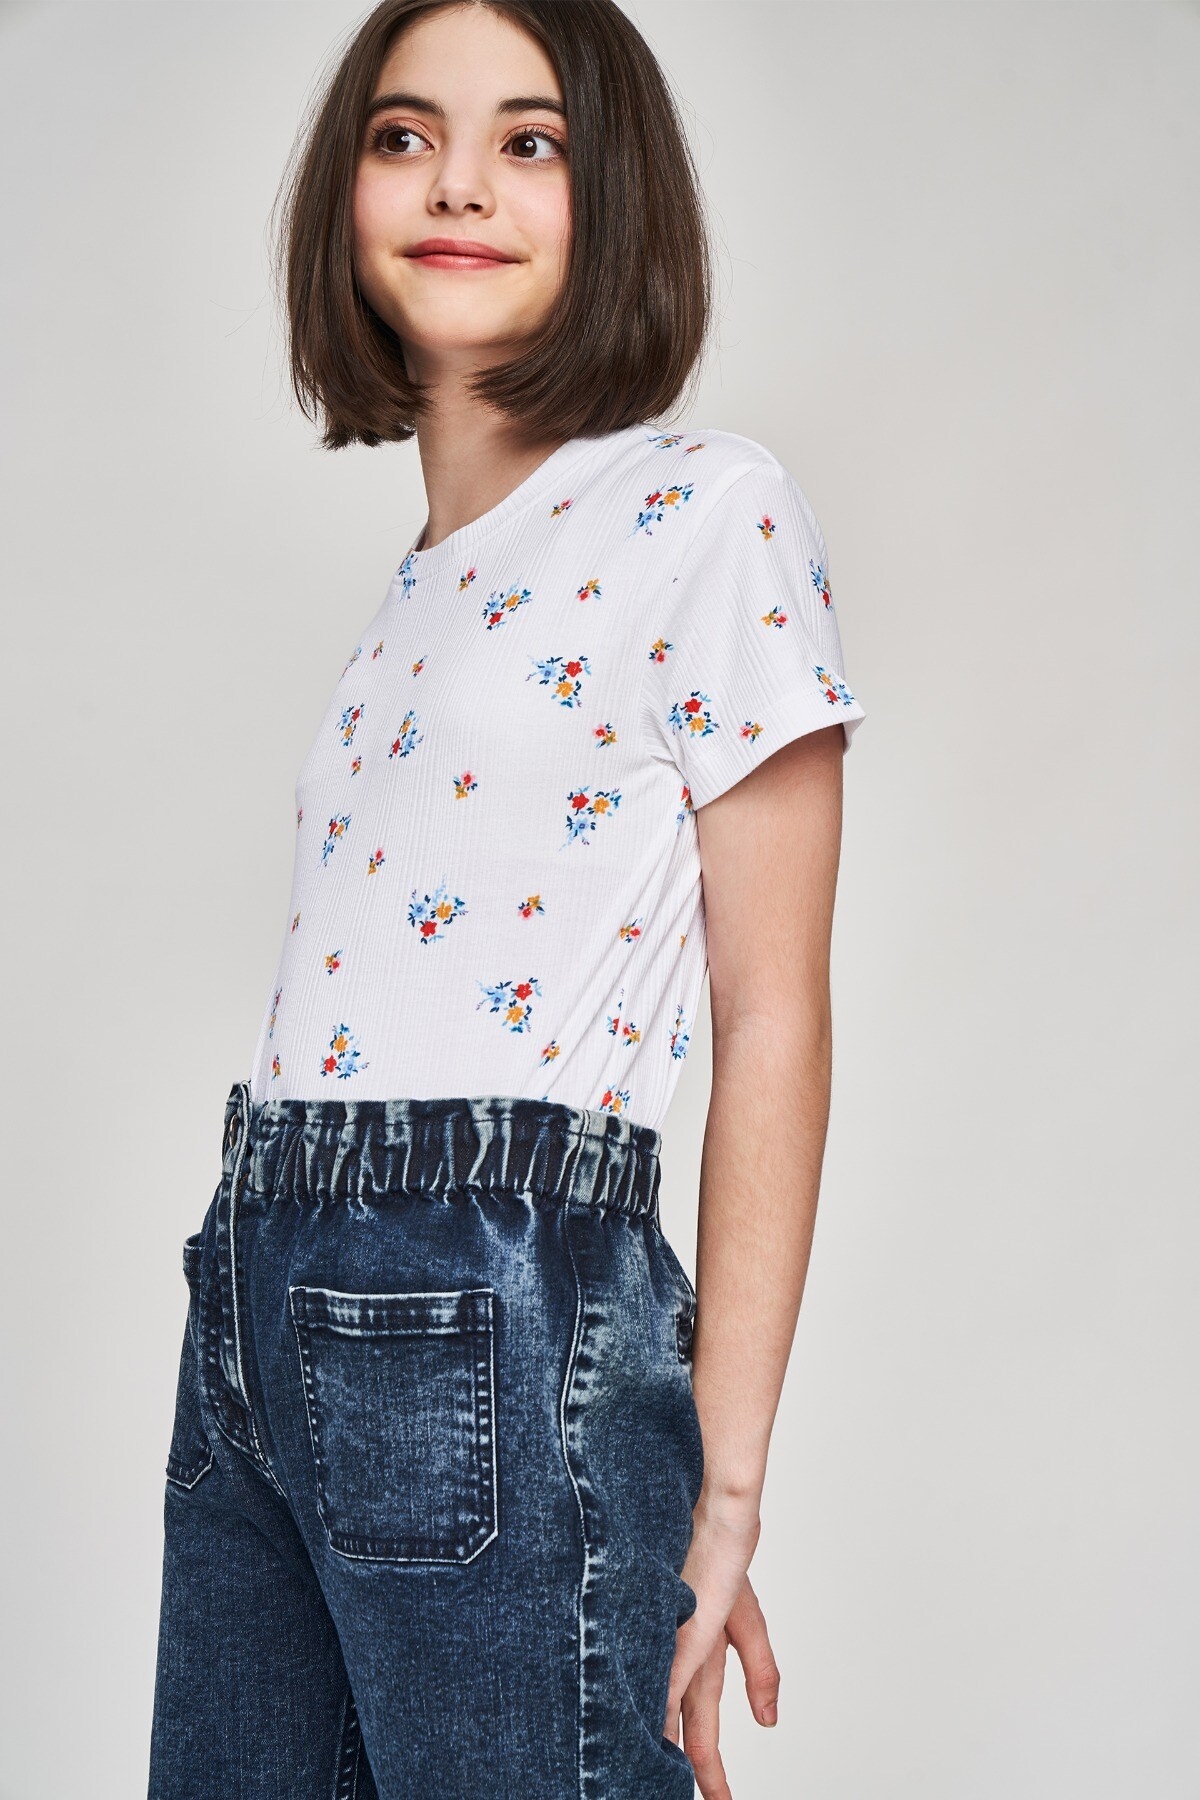 AND | White Floral Printed Shift Top 1